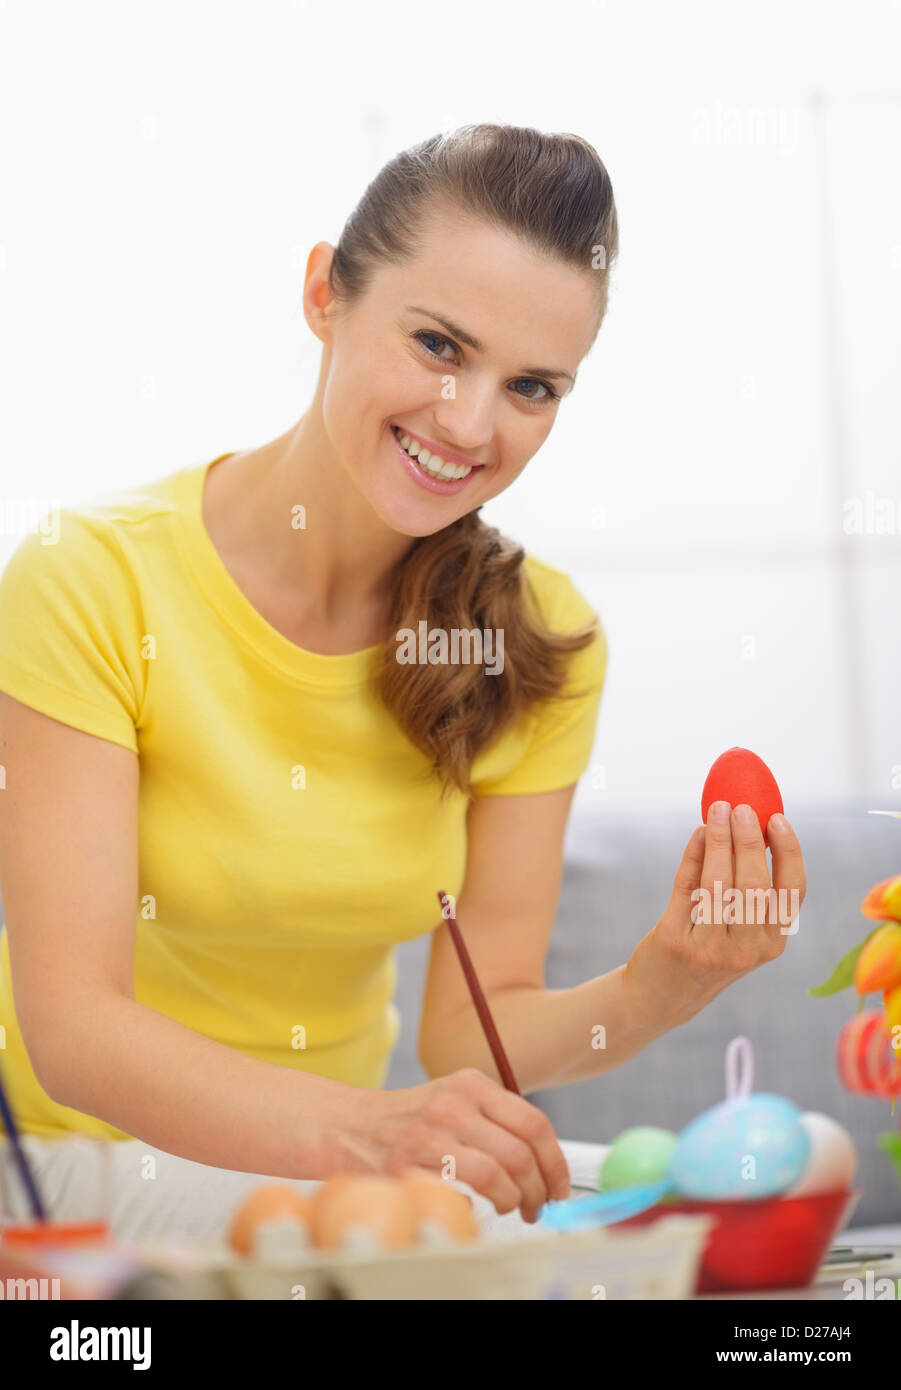 Smiling young woman preparing Easter red eggs Stock Photo